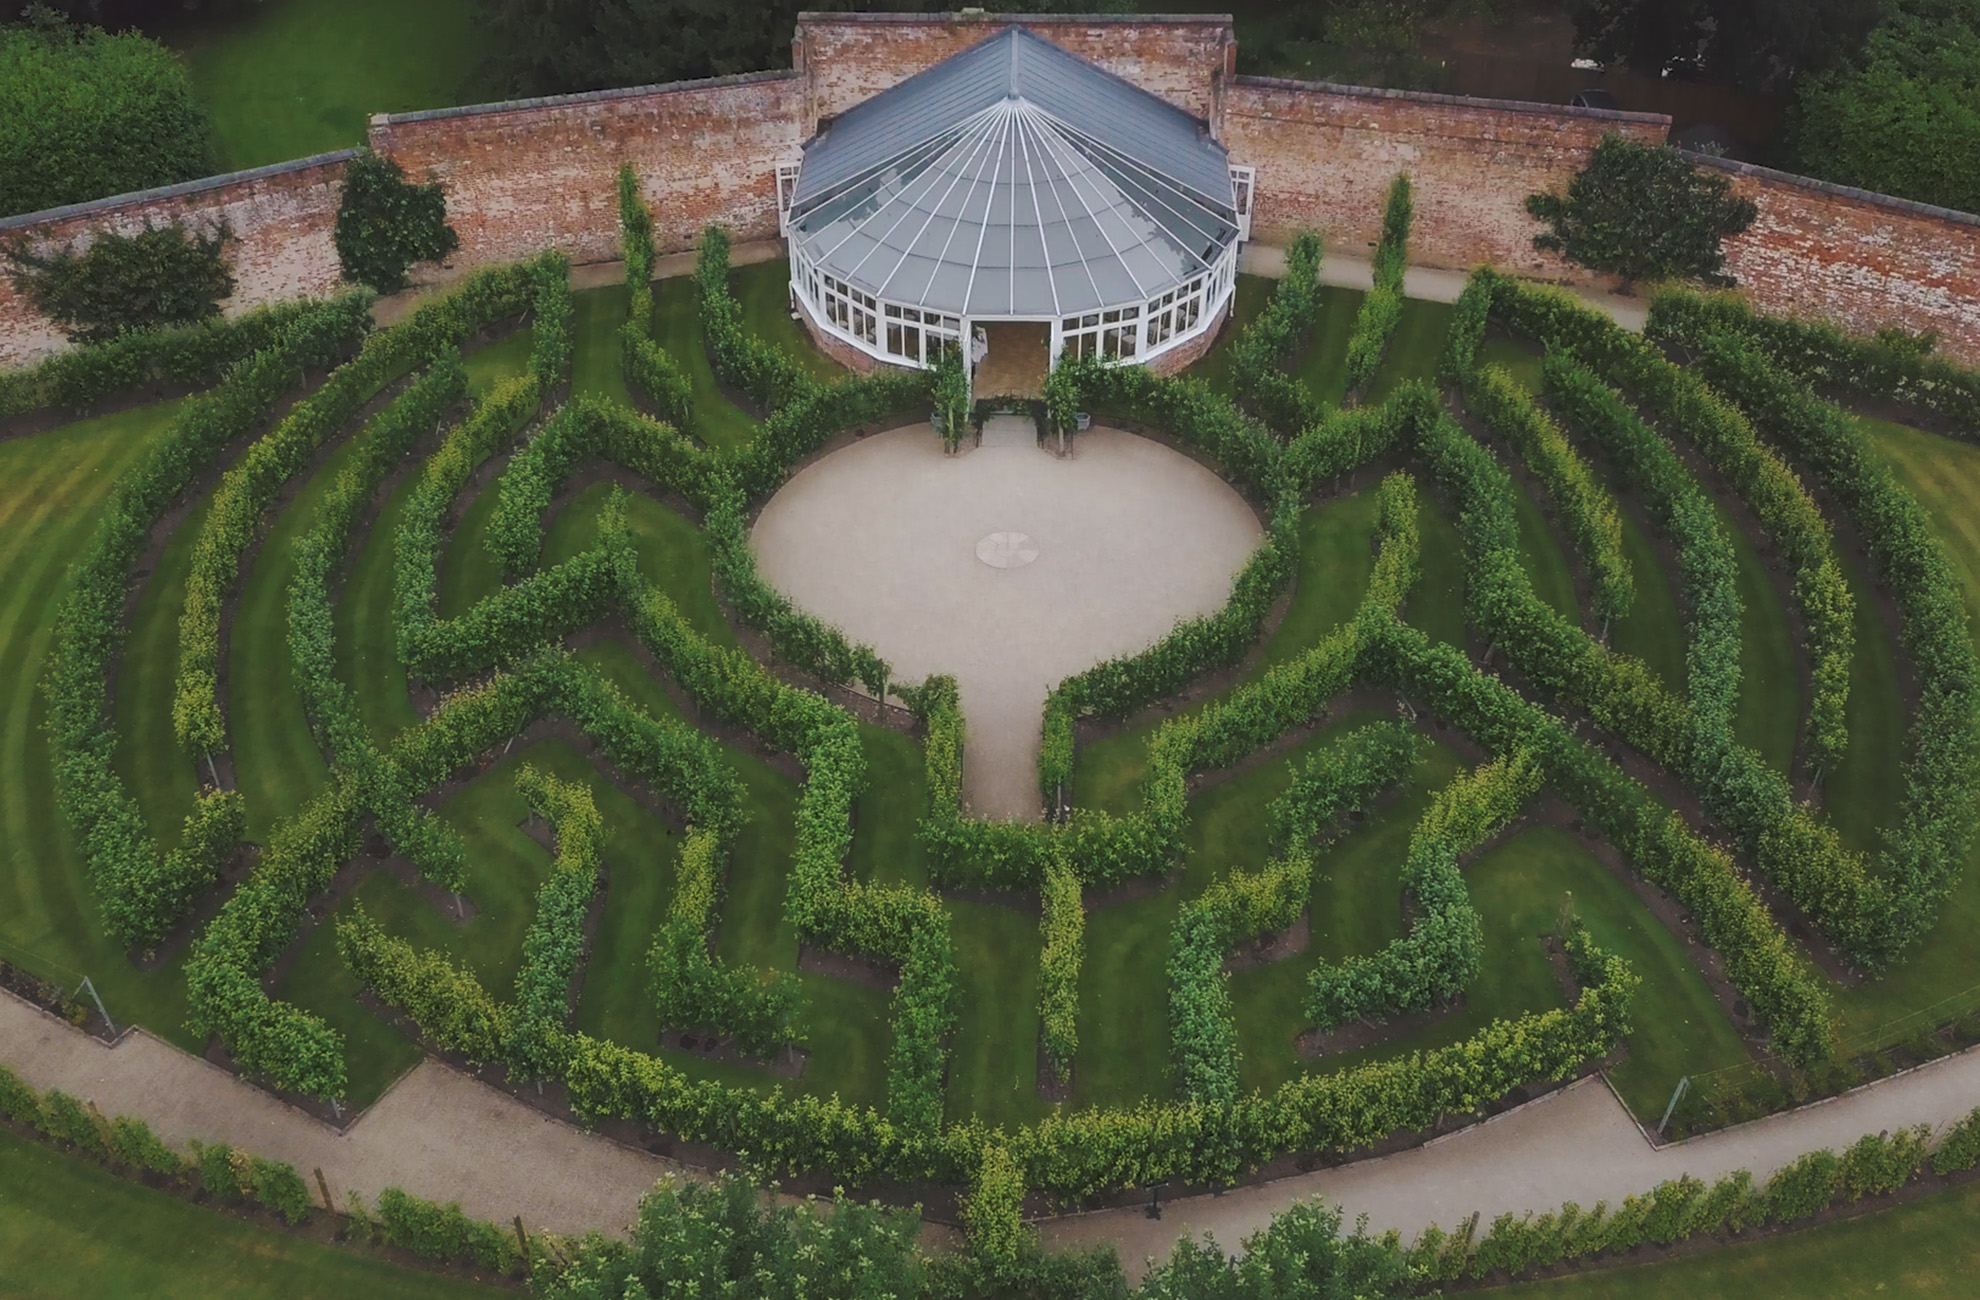 The Fruit Tree Maze at Combermere Abbey surrounds the beautiful Glasshouse which is perfect for a wedding ceremony